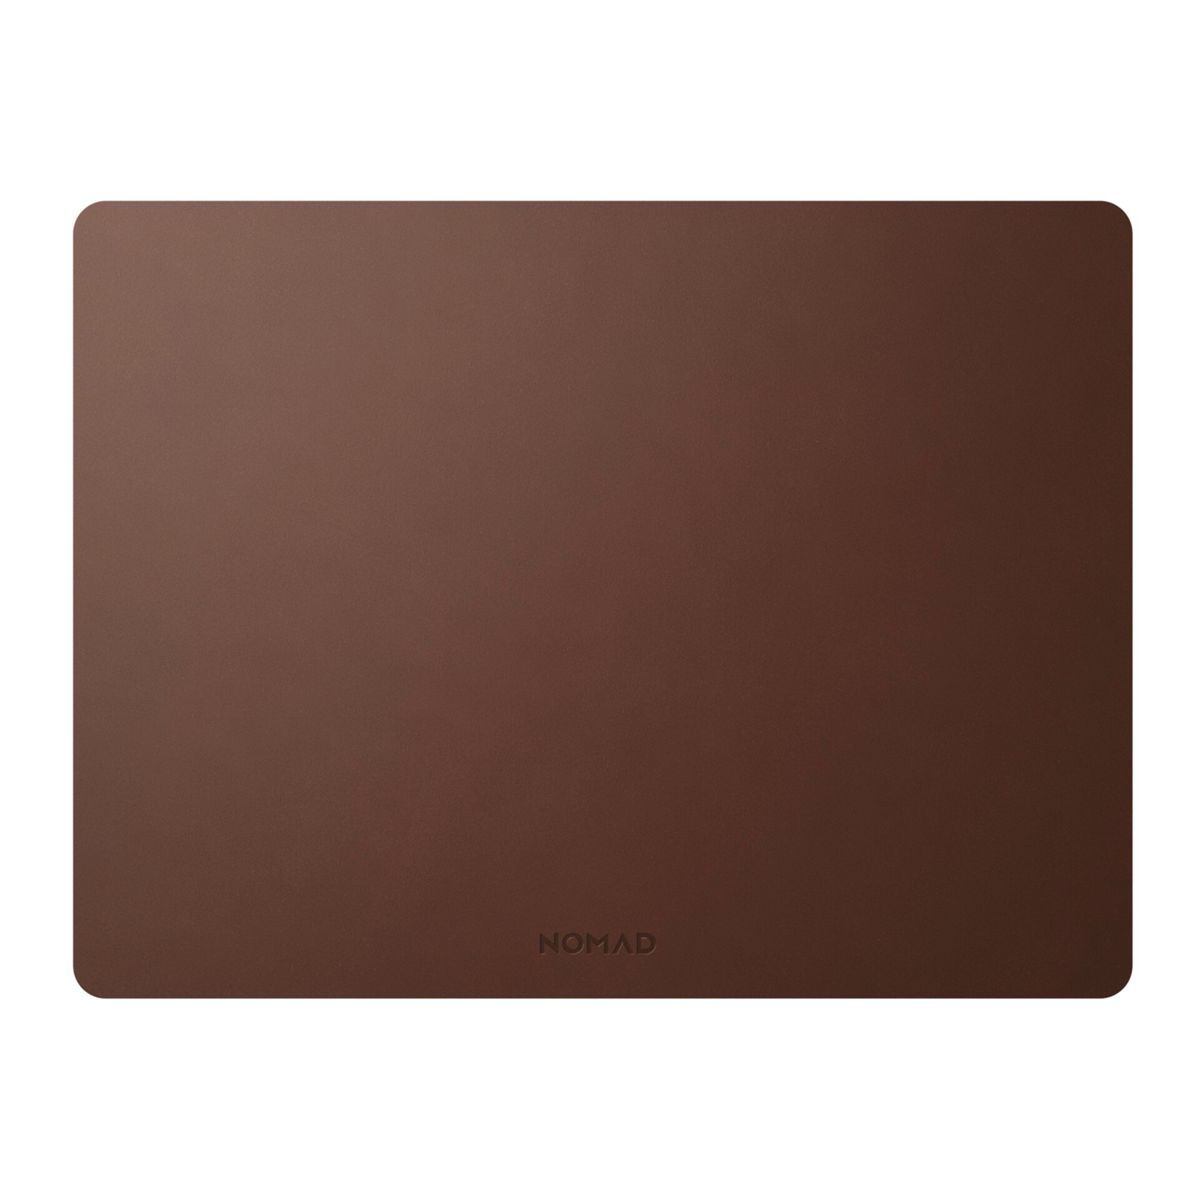 NOMAD Mousepad 16-Inch, Brown Leather Rustic Mauspad